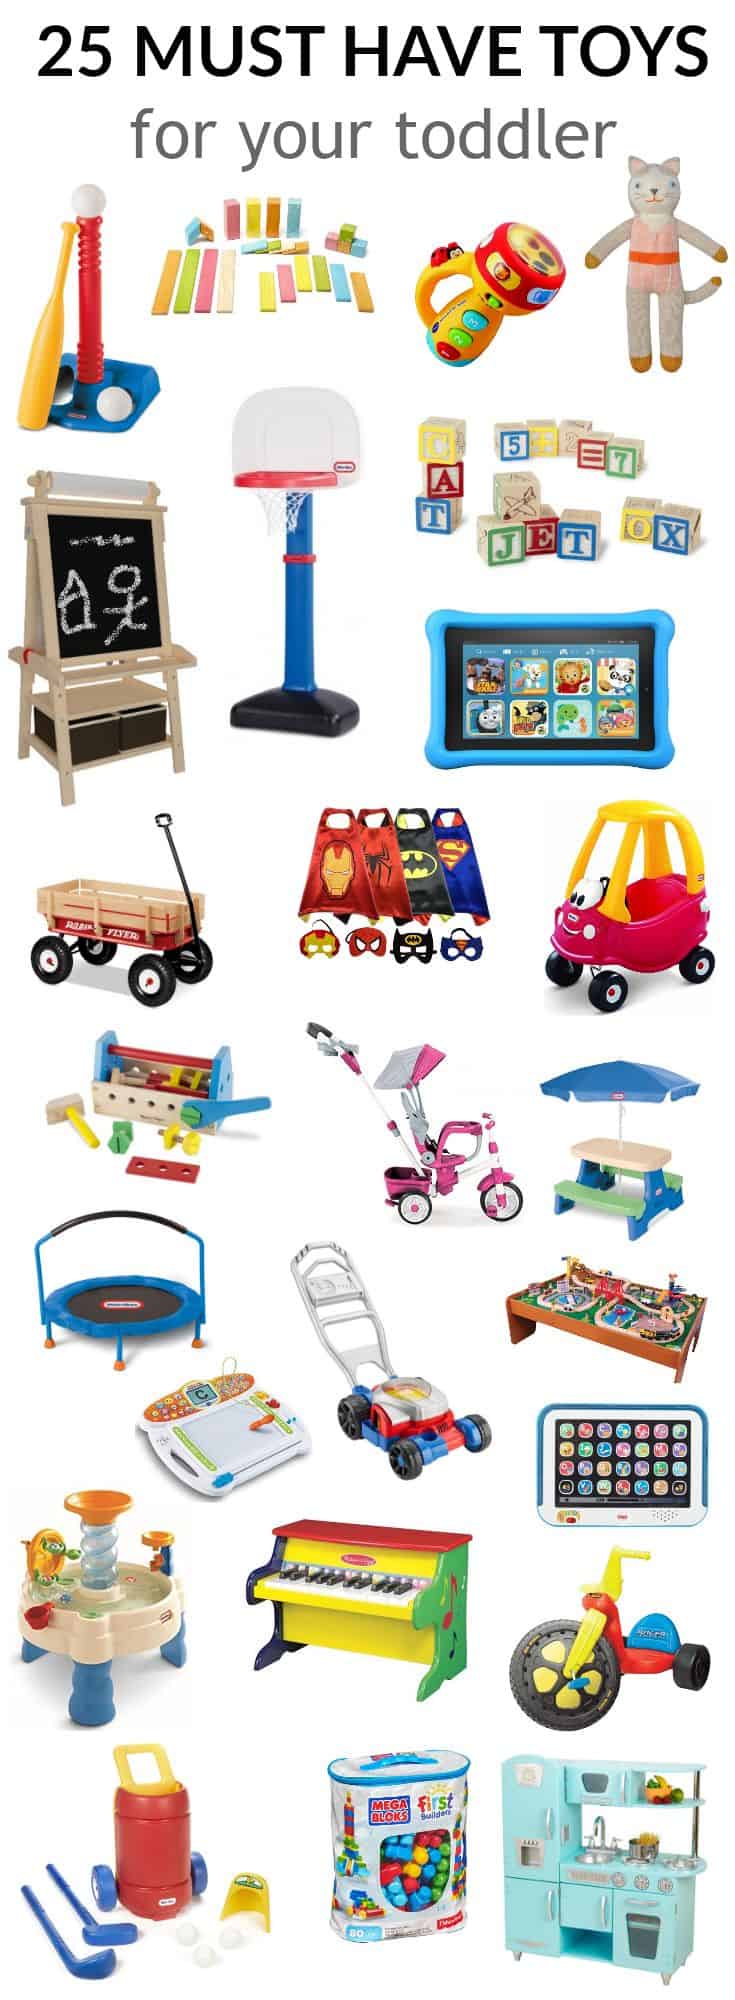 Must have Toddler Toys For Christmas